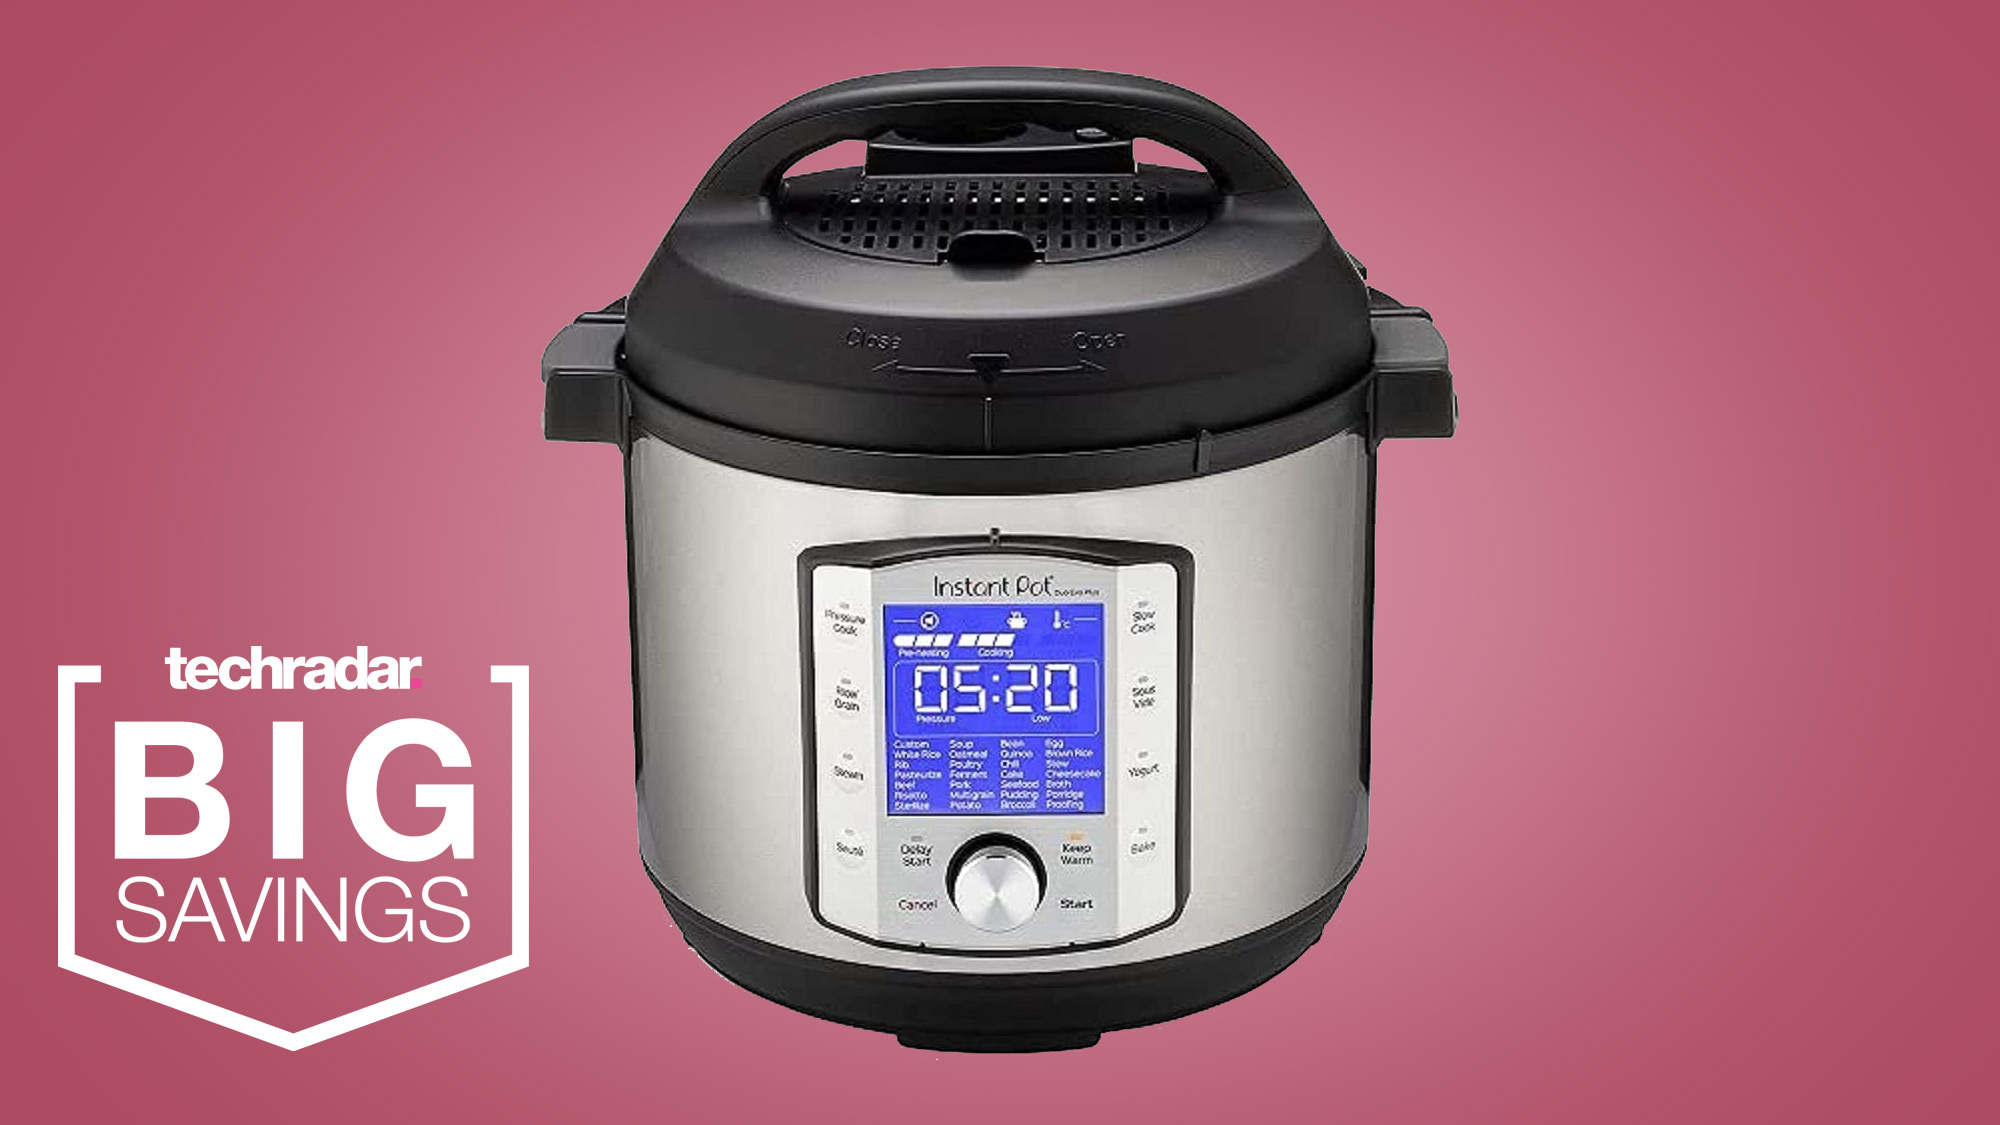 This super-versatile Instant Pot is close to its lowest-ever price